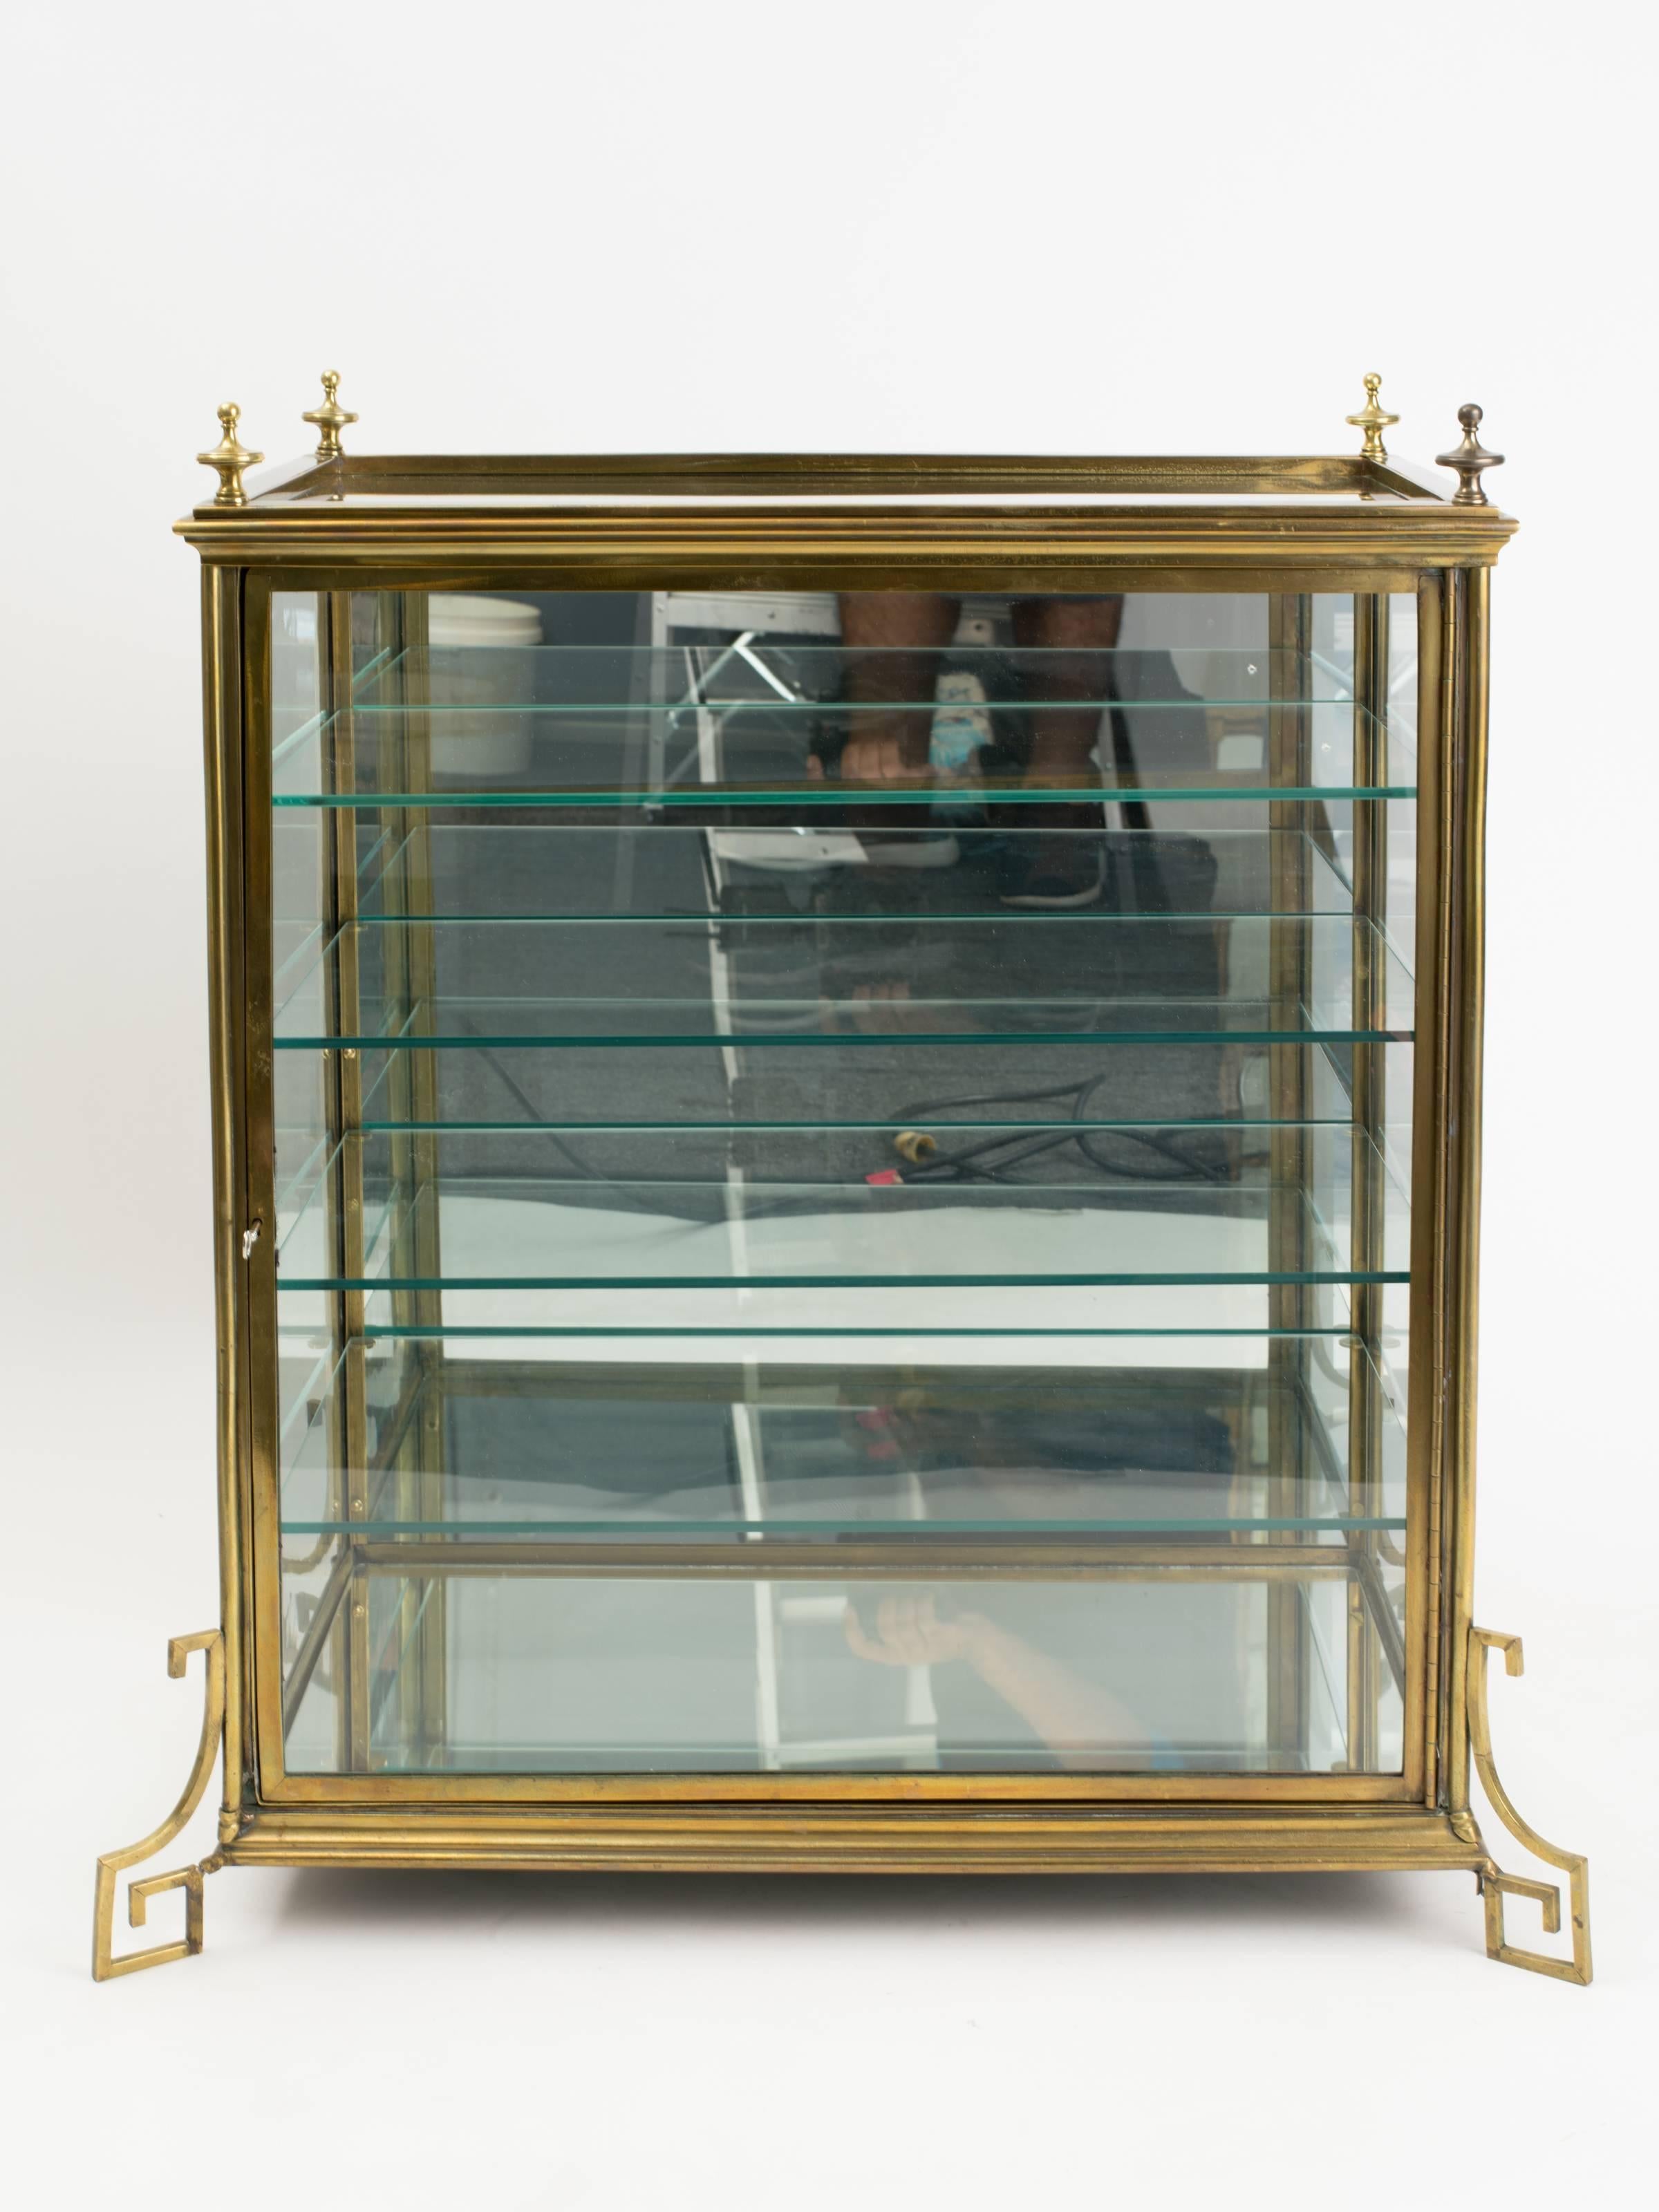 A midcentury brass curio cabinet featuring Greek key legs and mirror backing.
Original lock and key.